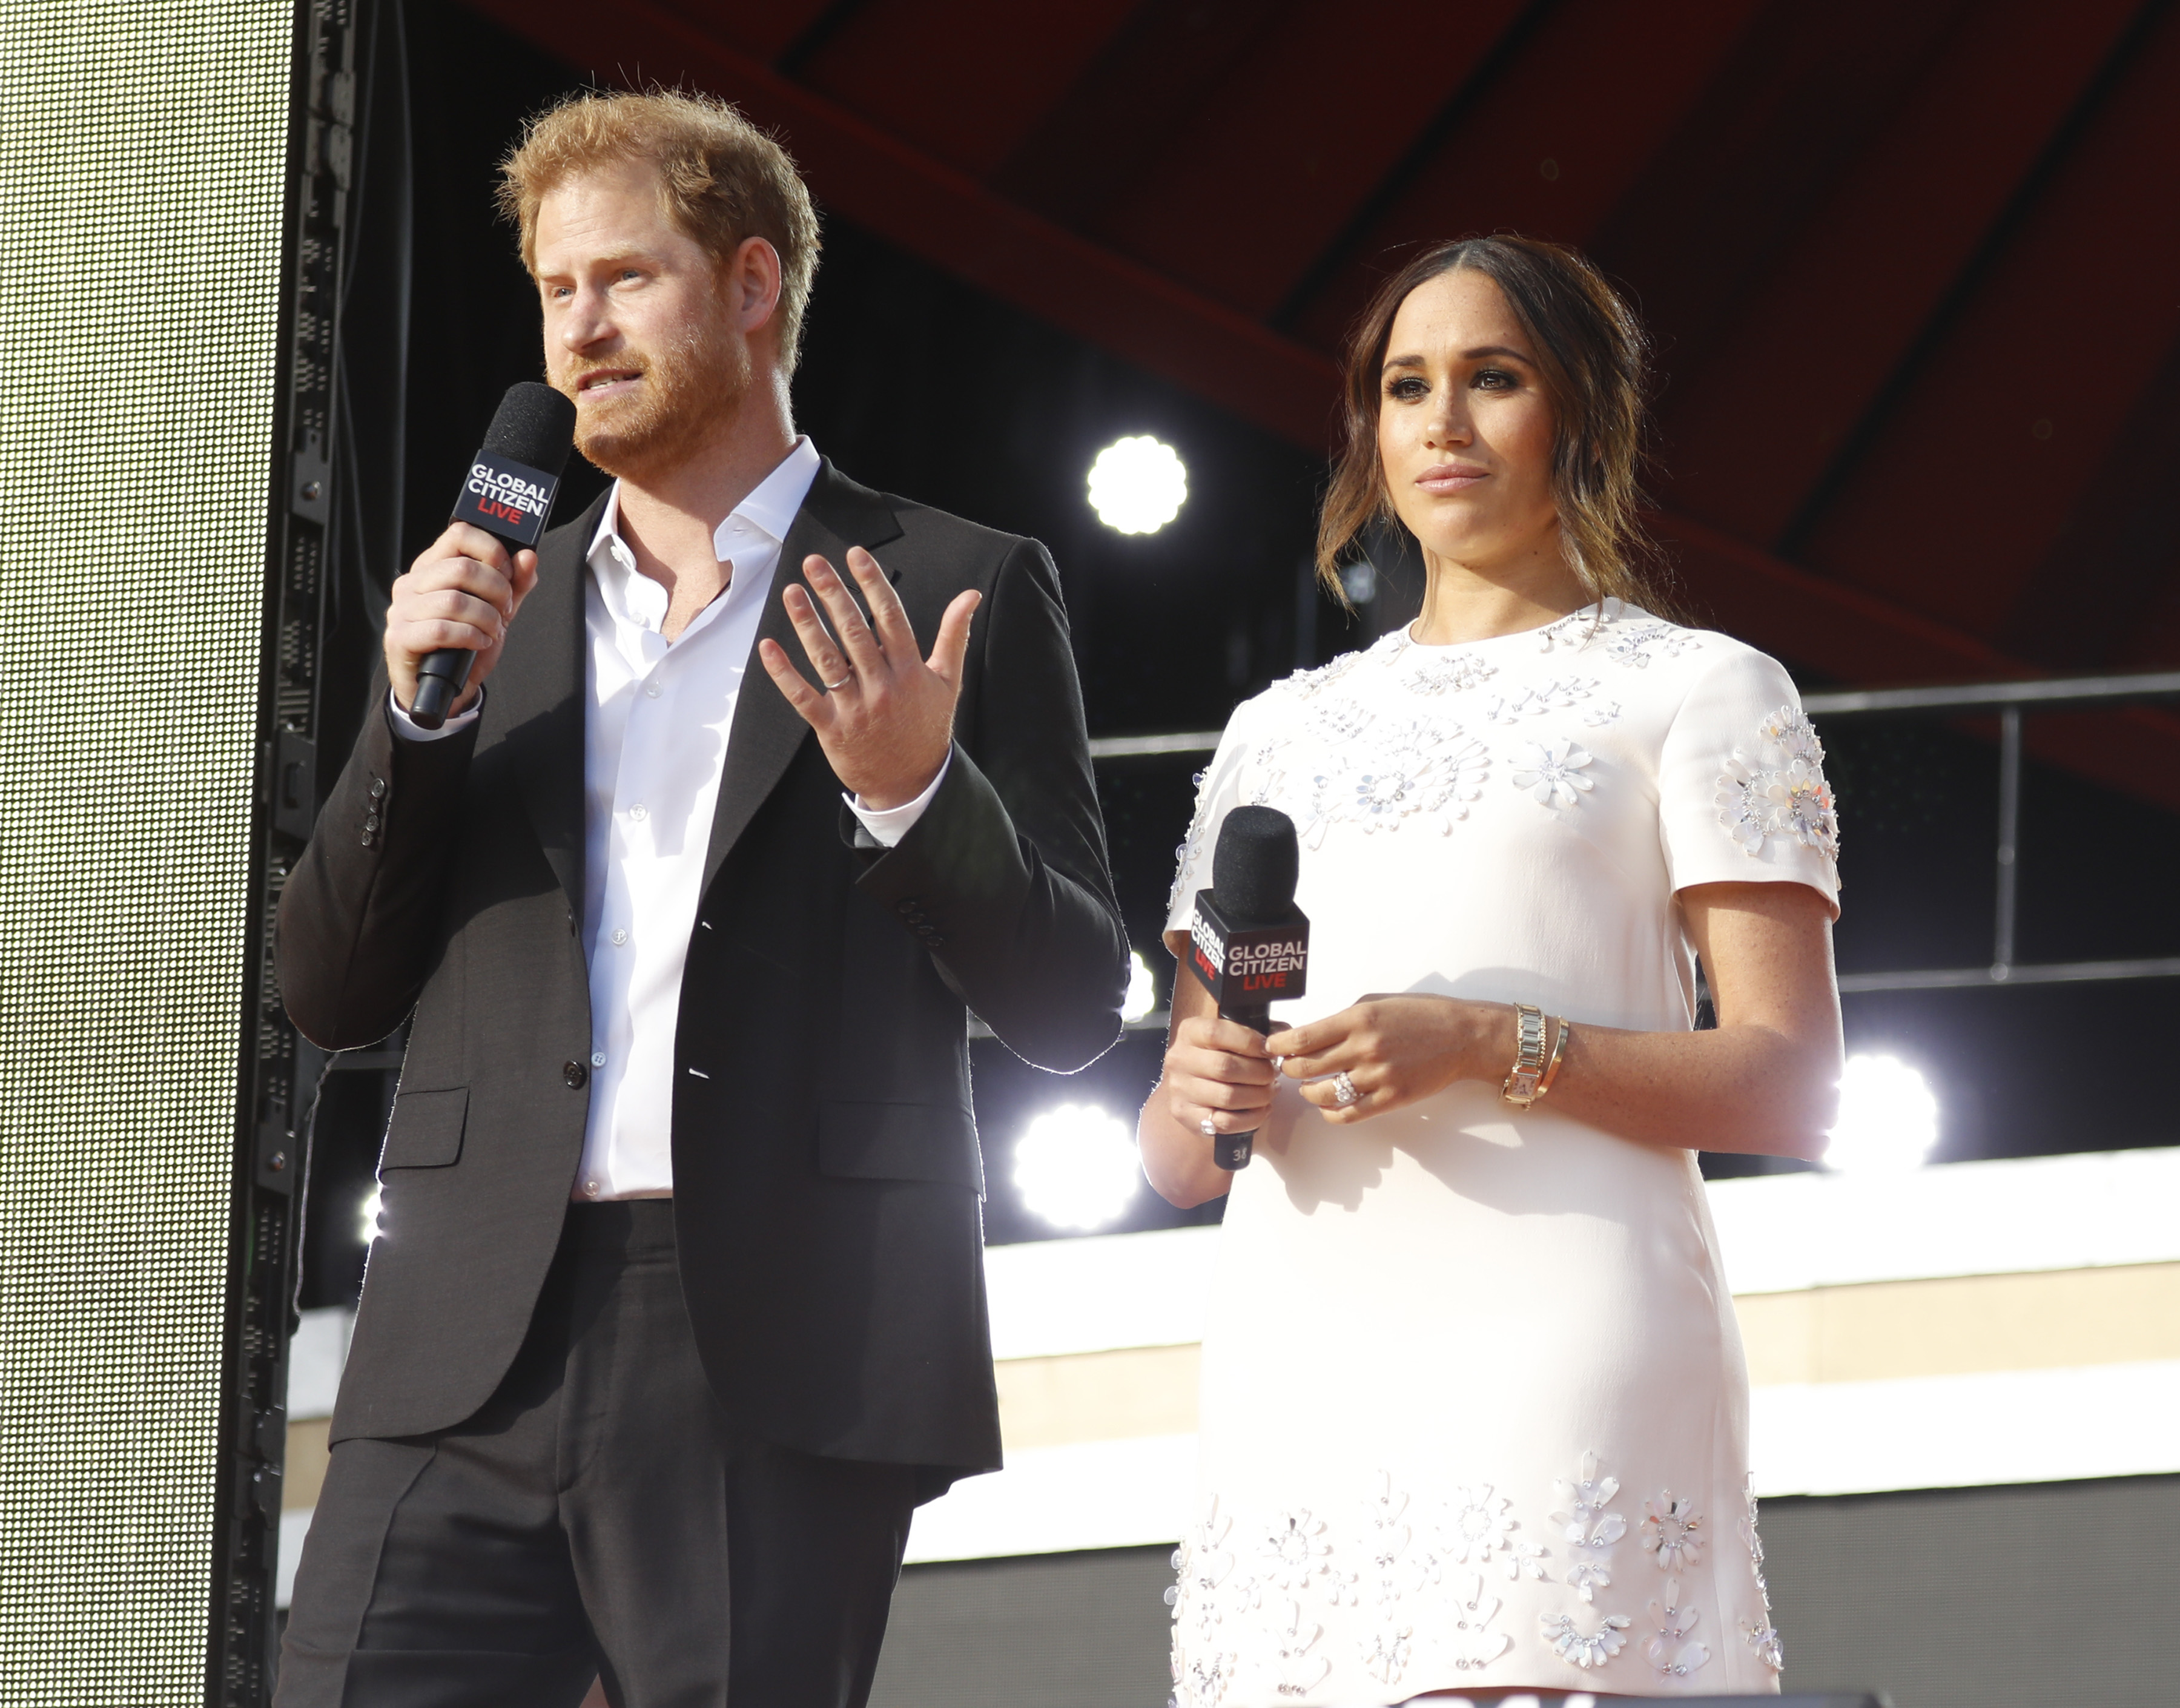 Prince Harry and Meghan Markle speaking at Global Citizen Live in New York City on September 25, 2021 | Source: Getty Images